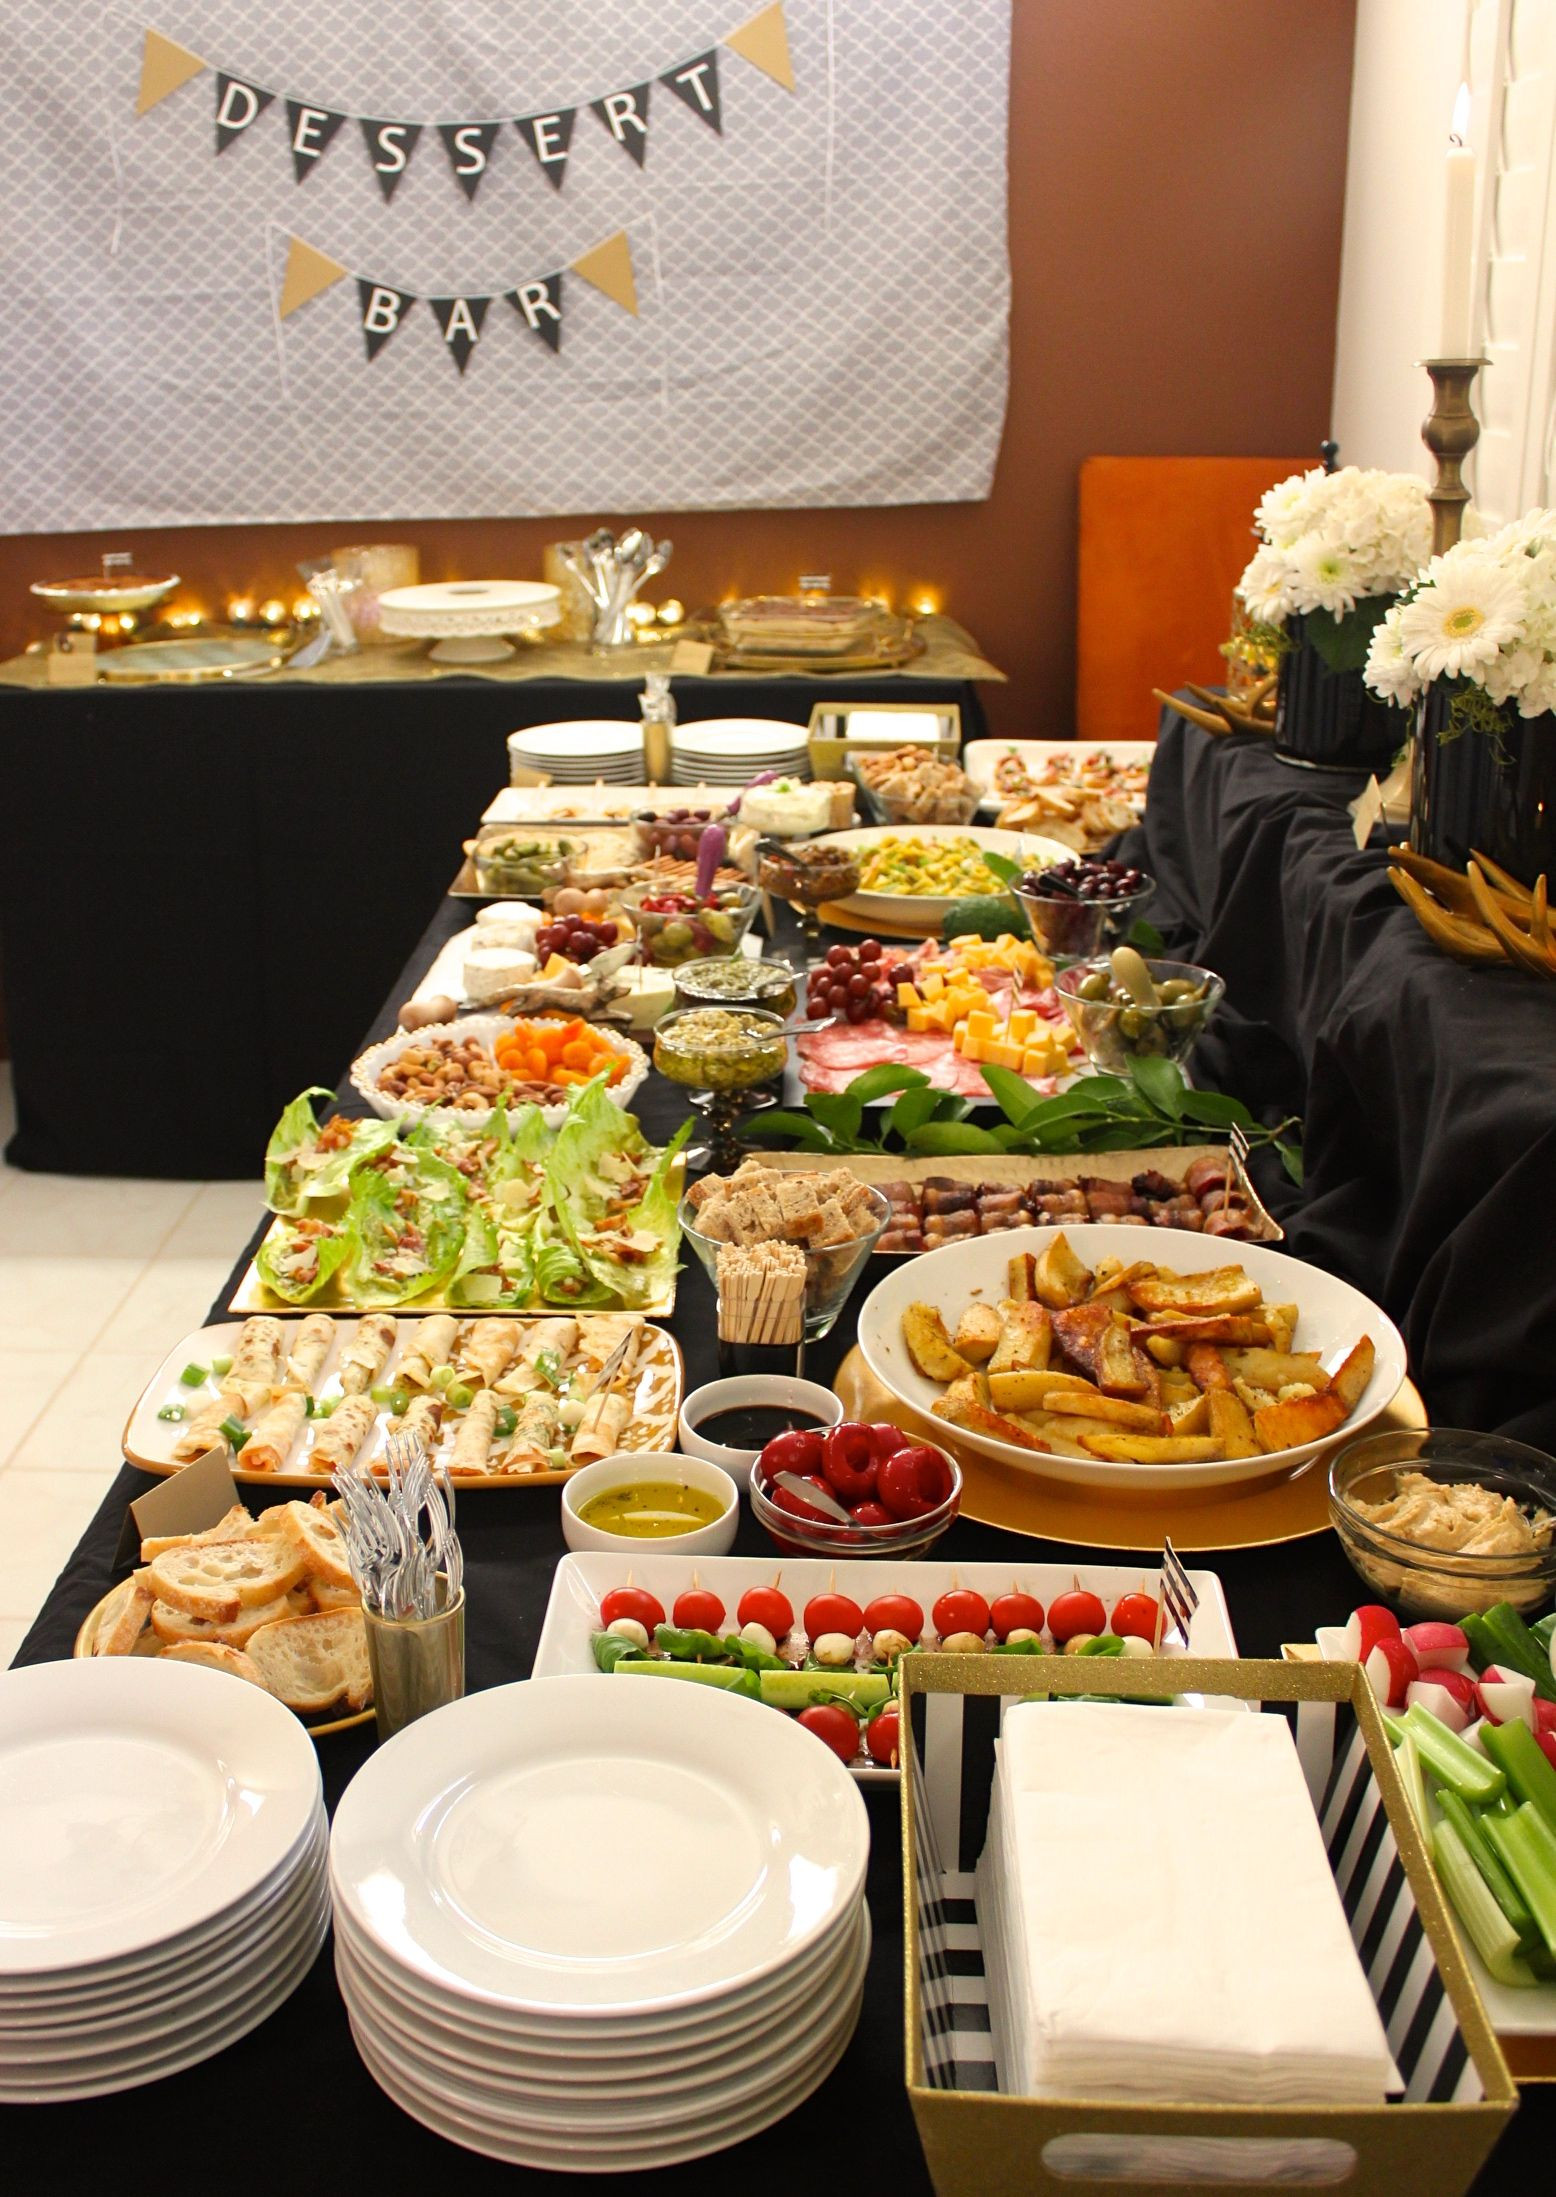 Graduation Party Buffet Ideas
 Event Catering Buffet food set up Heavy Appetizers